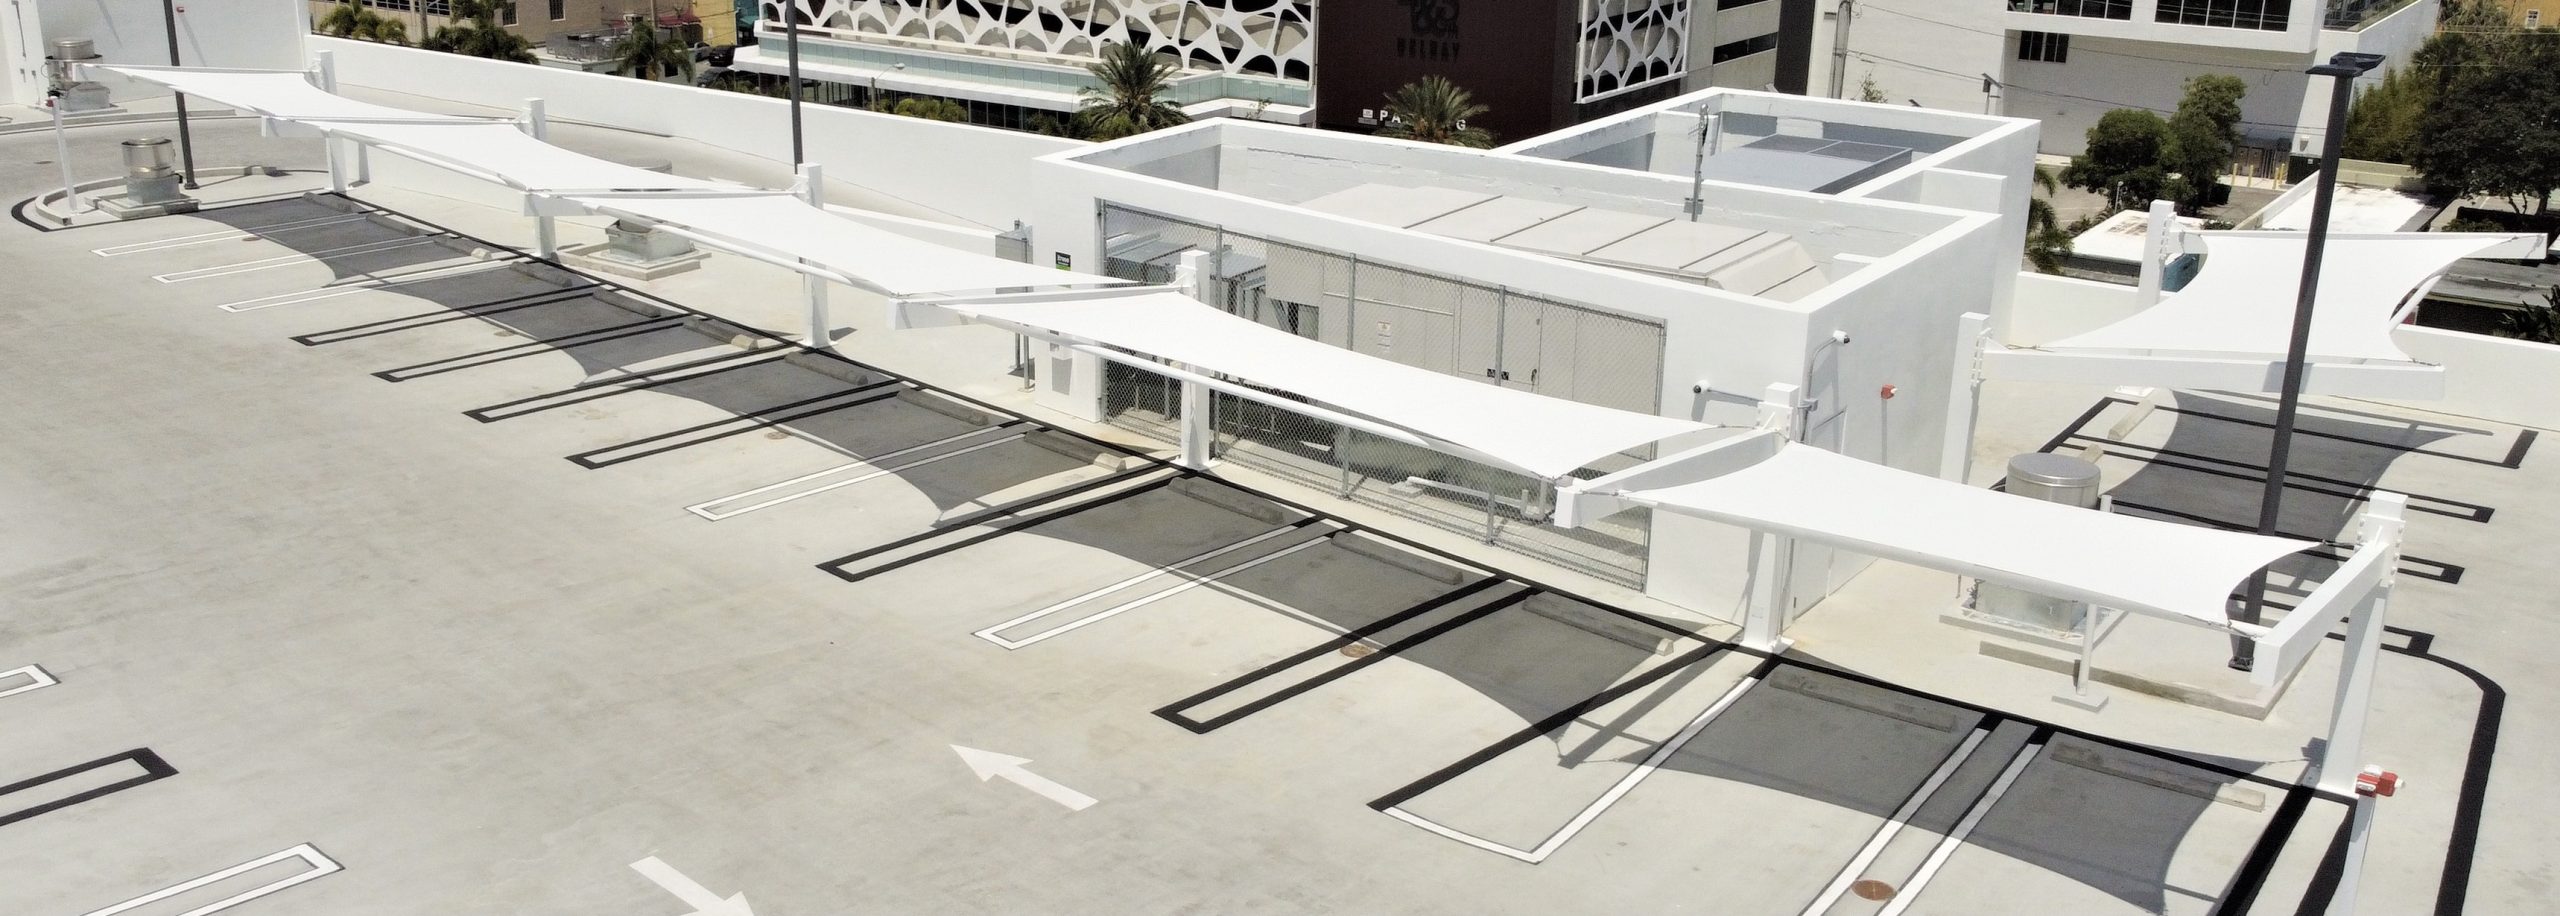 white modern Shade Structure over a rooftop parking lot